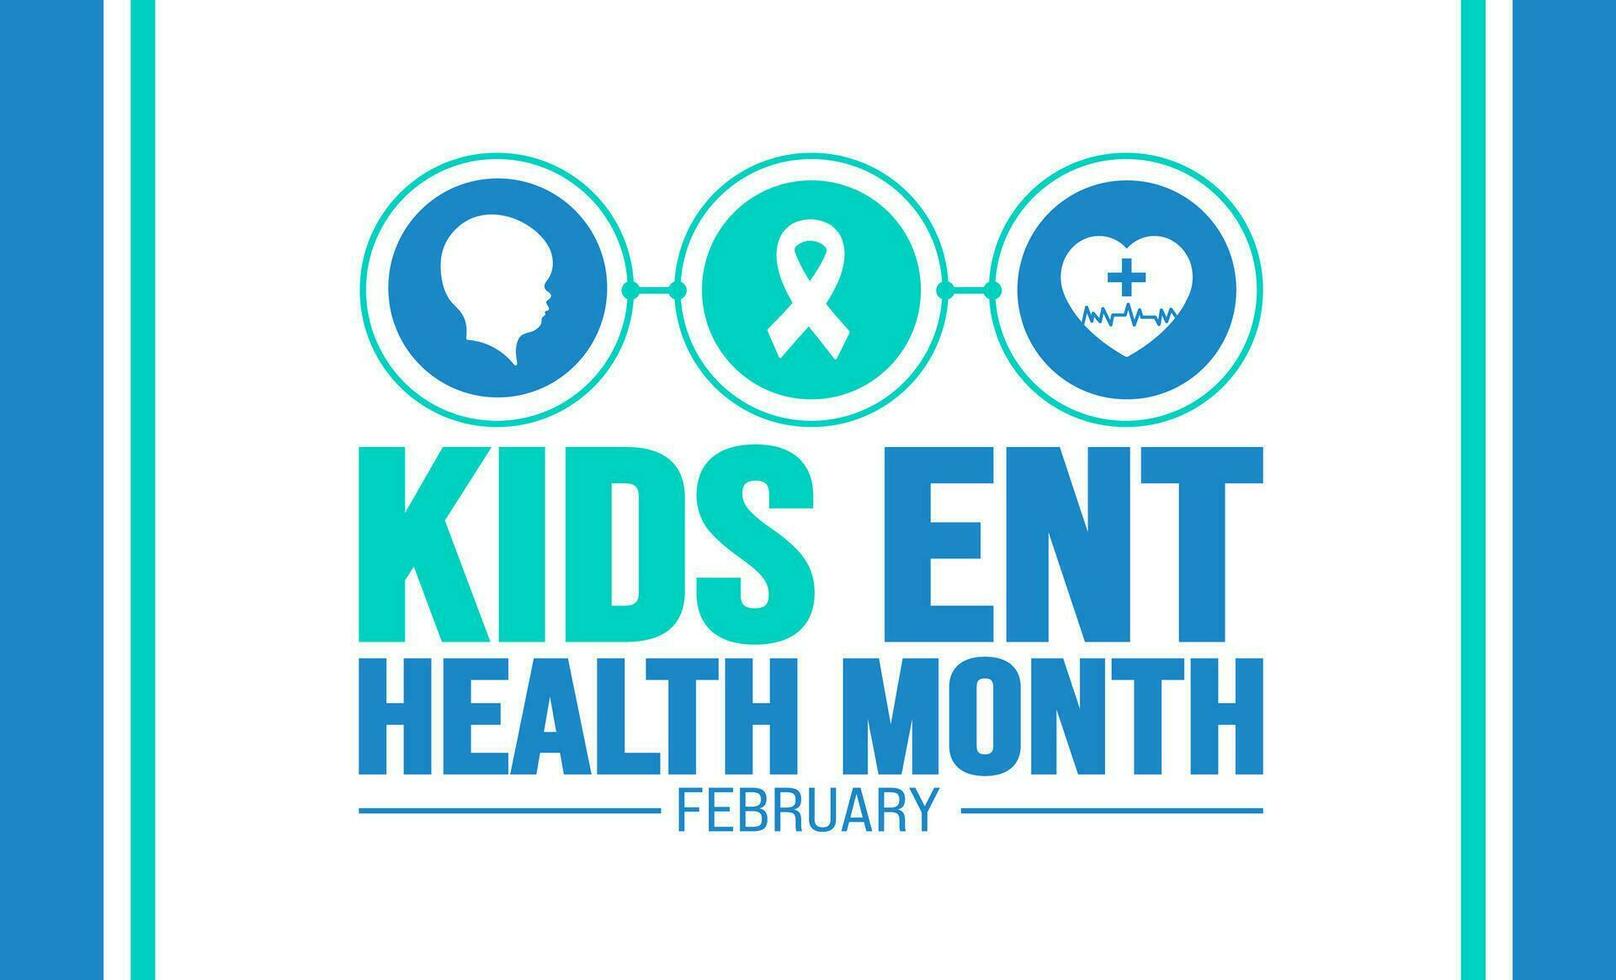 February is Kids ENT Health Month background template. Holiday concept. background, banner, placard, card, and poster design template with text inscription and standard color. vector illustration.